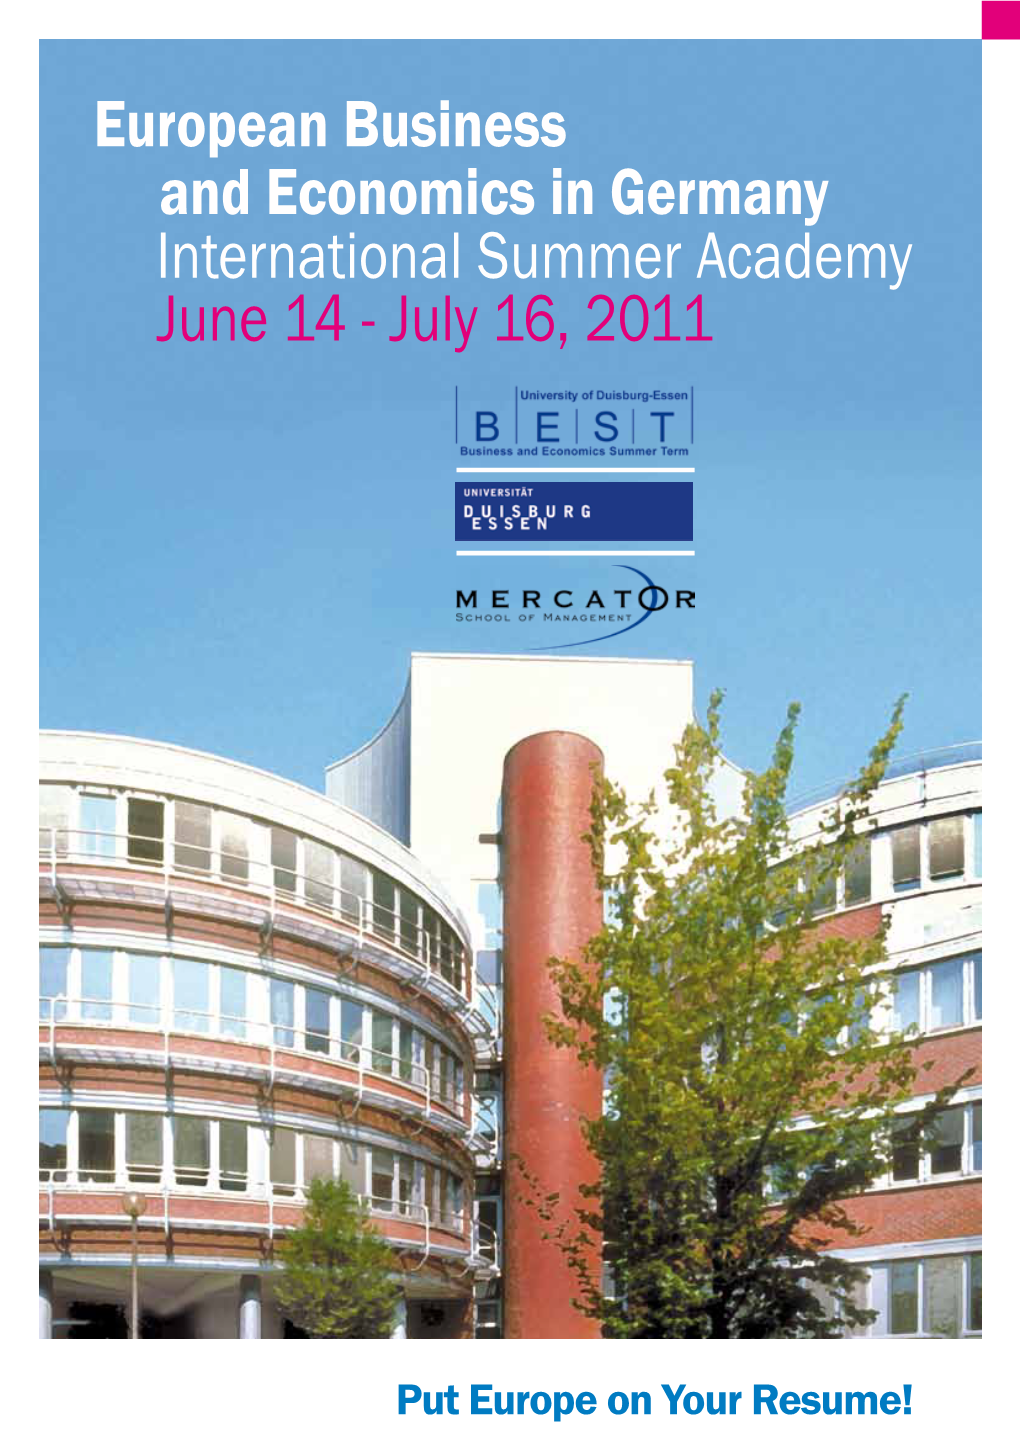 European Business and Economics in Germany International Summer Academy June 14 - July 16, 2011